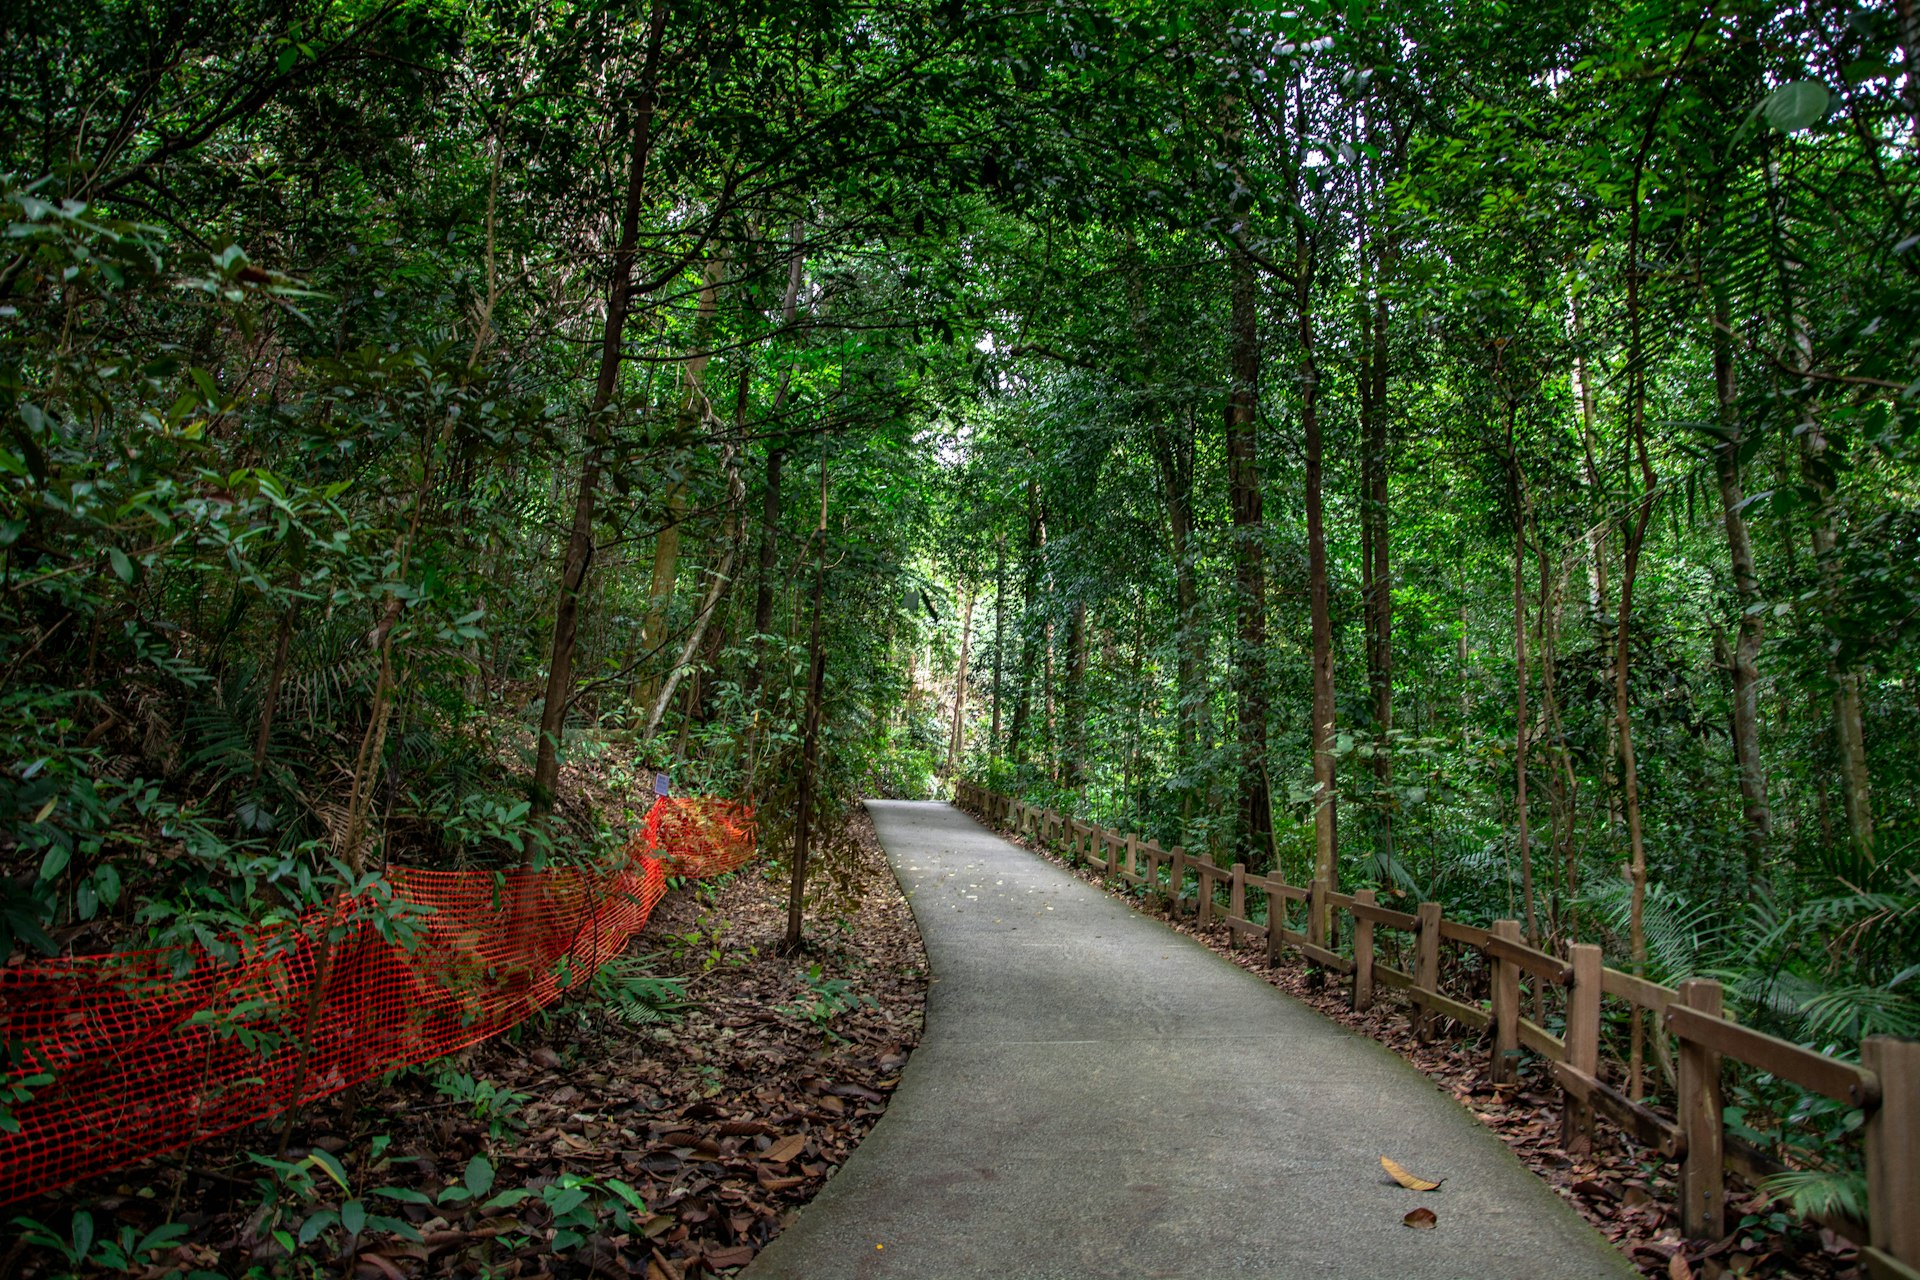 A hiking trail through dark forest in Bukit Timah